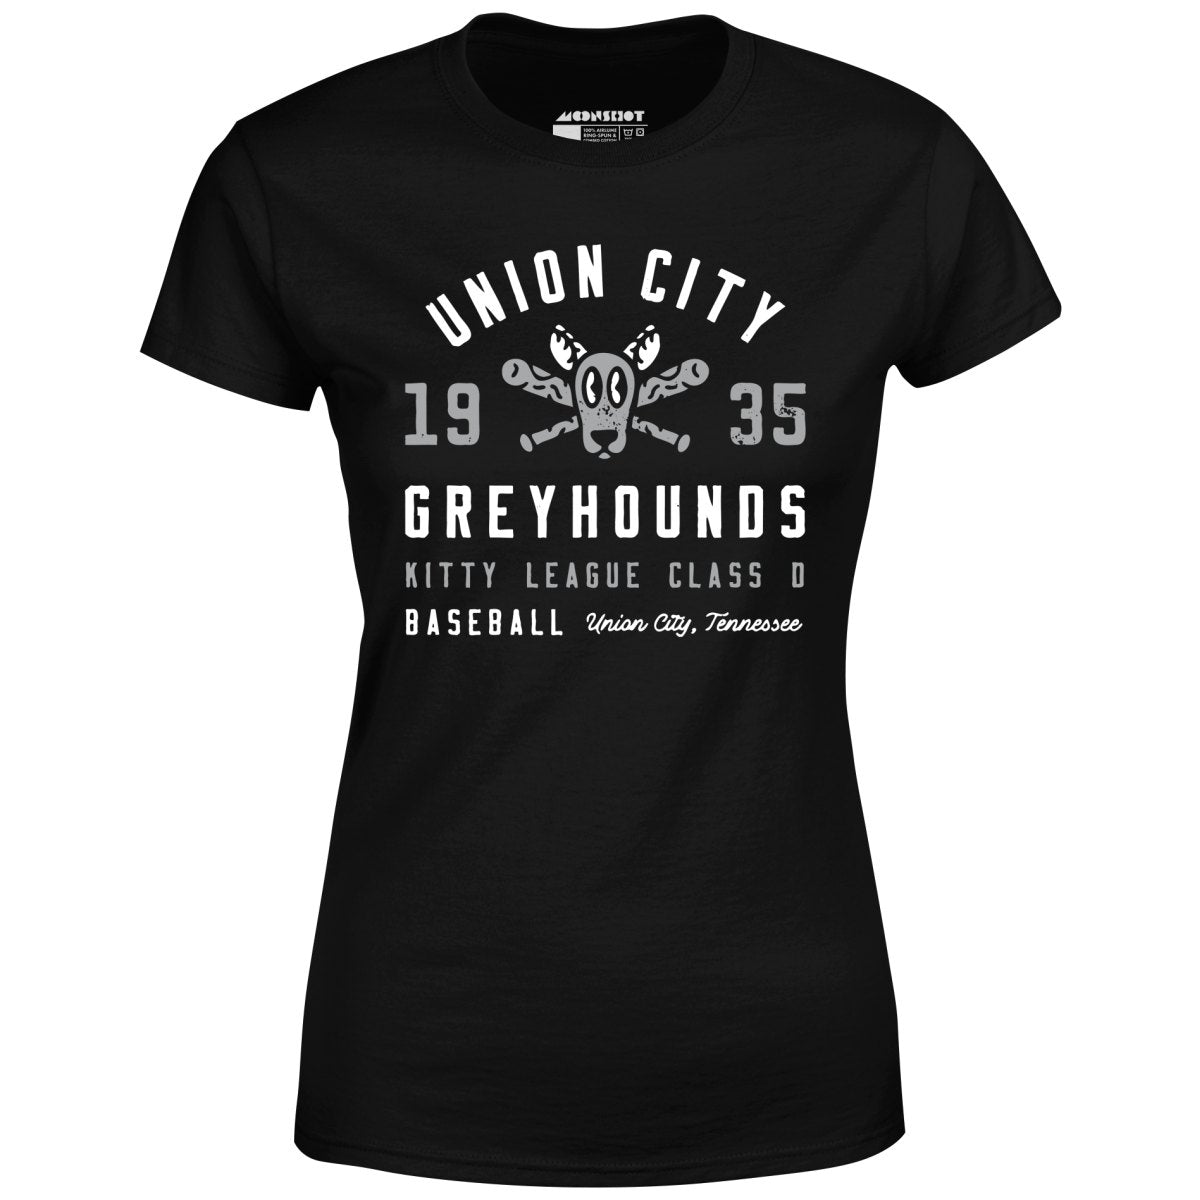 Union City Greyhounds - Tennessee - Vintage Defunct Baseball Teams - Women's T-Shirt